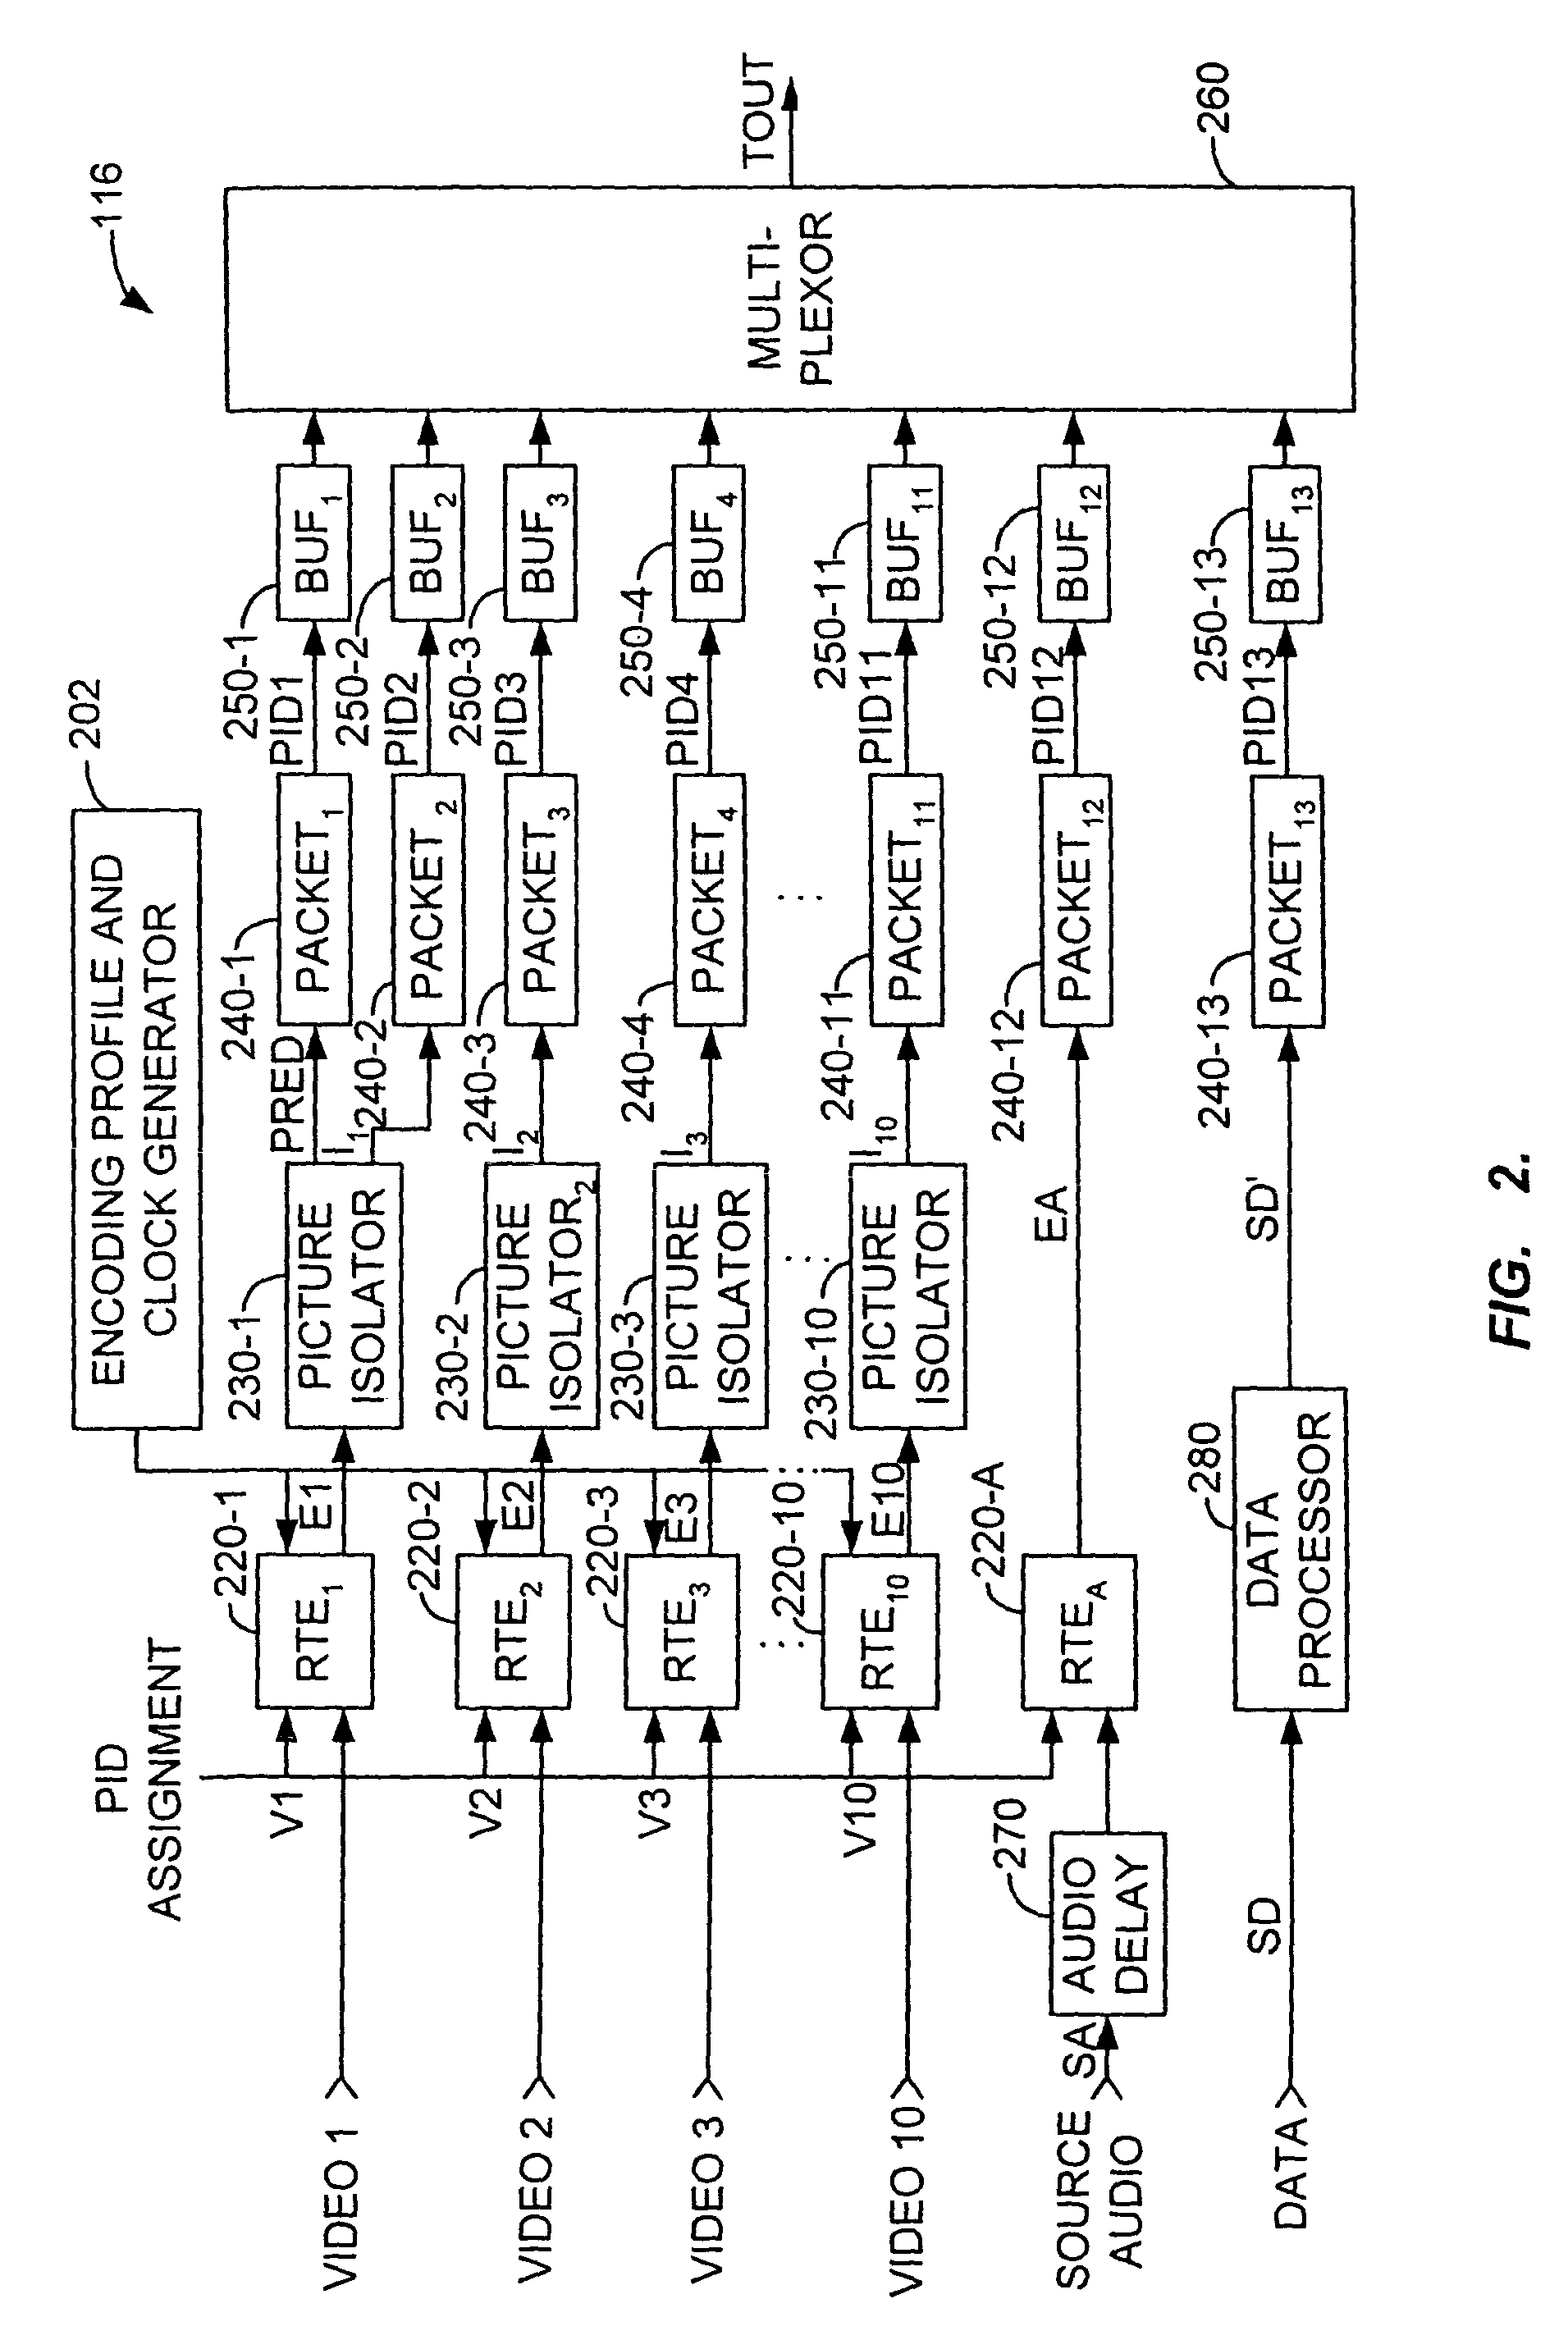 Method and apparatus for compressing video sequences